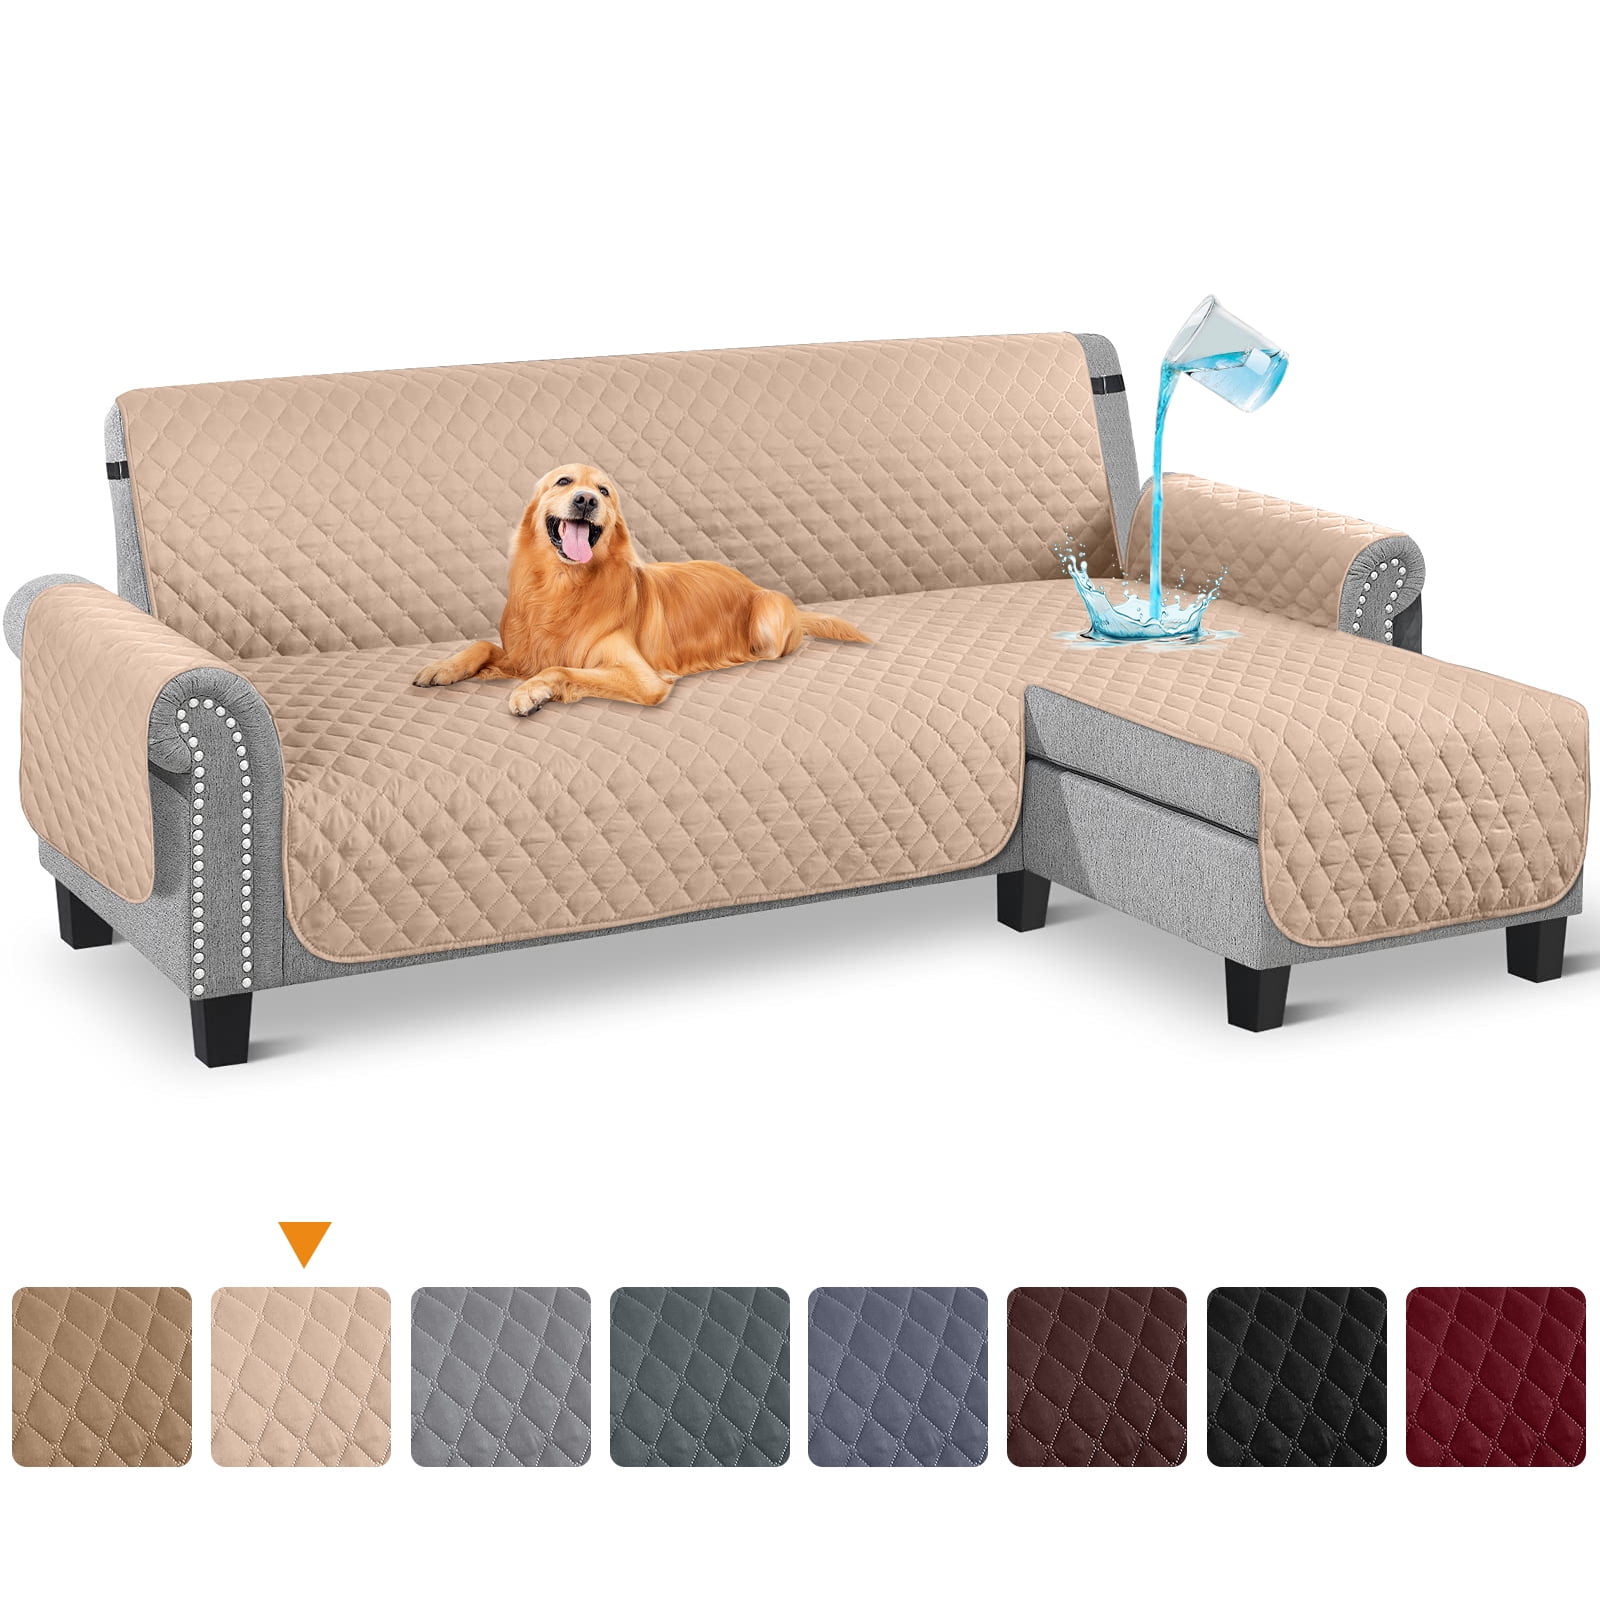 LIANGLAOI Faux Pu Leather Sofa Cover,165% Waterproof Non-Slip Sectional  Couch Cover,Solid Color Sofa Slipcover for Dogs,Children,Pets Furniture